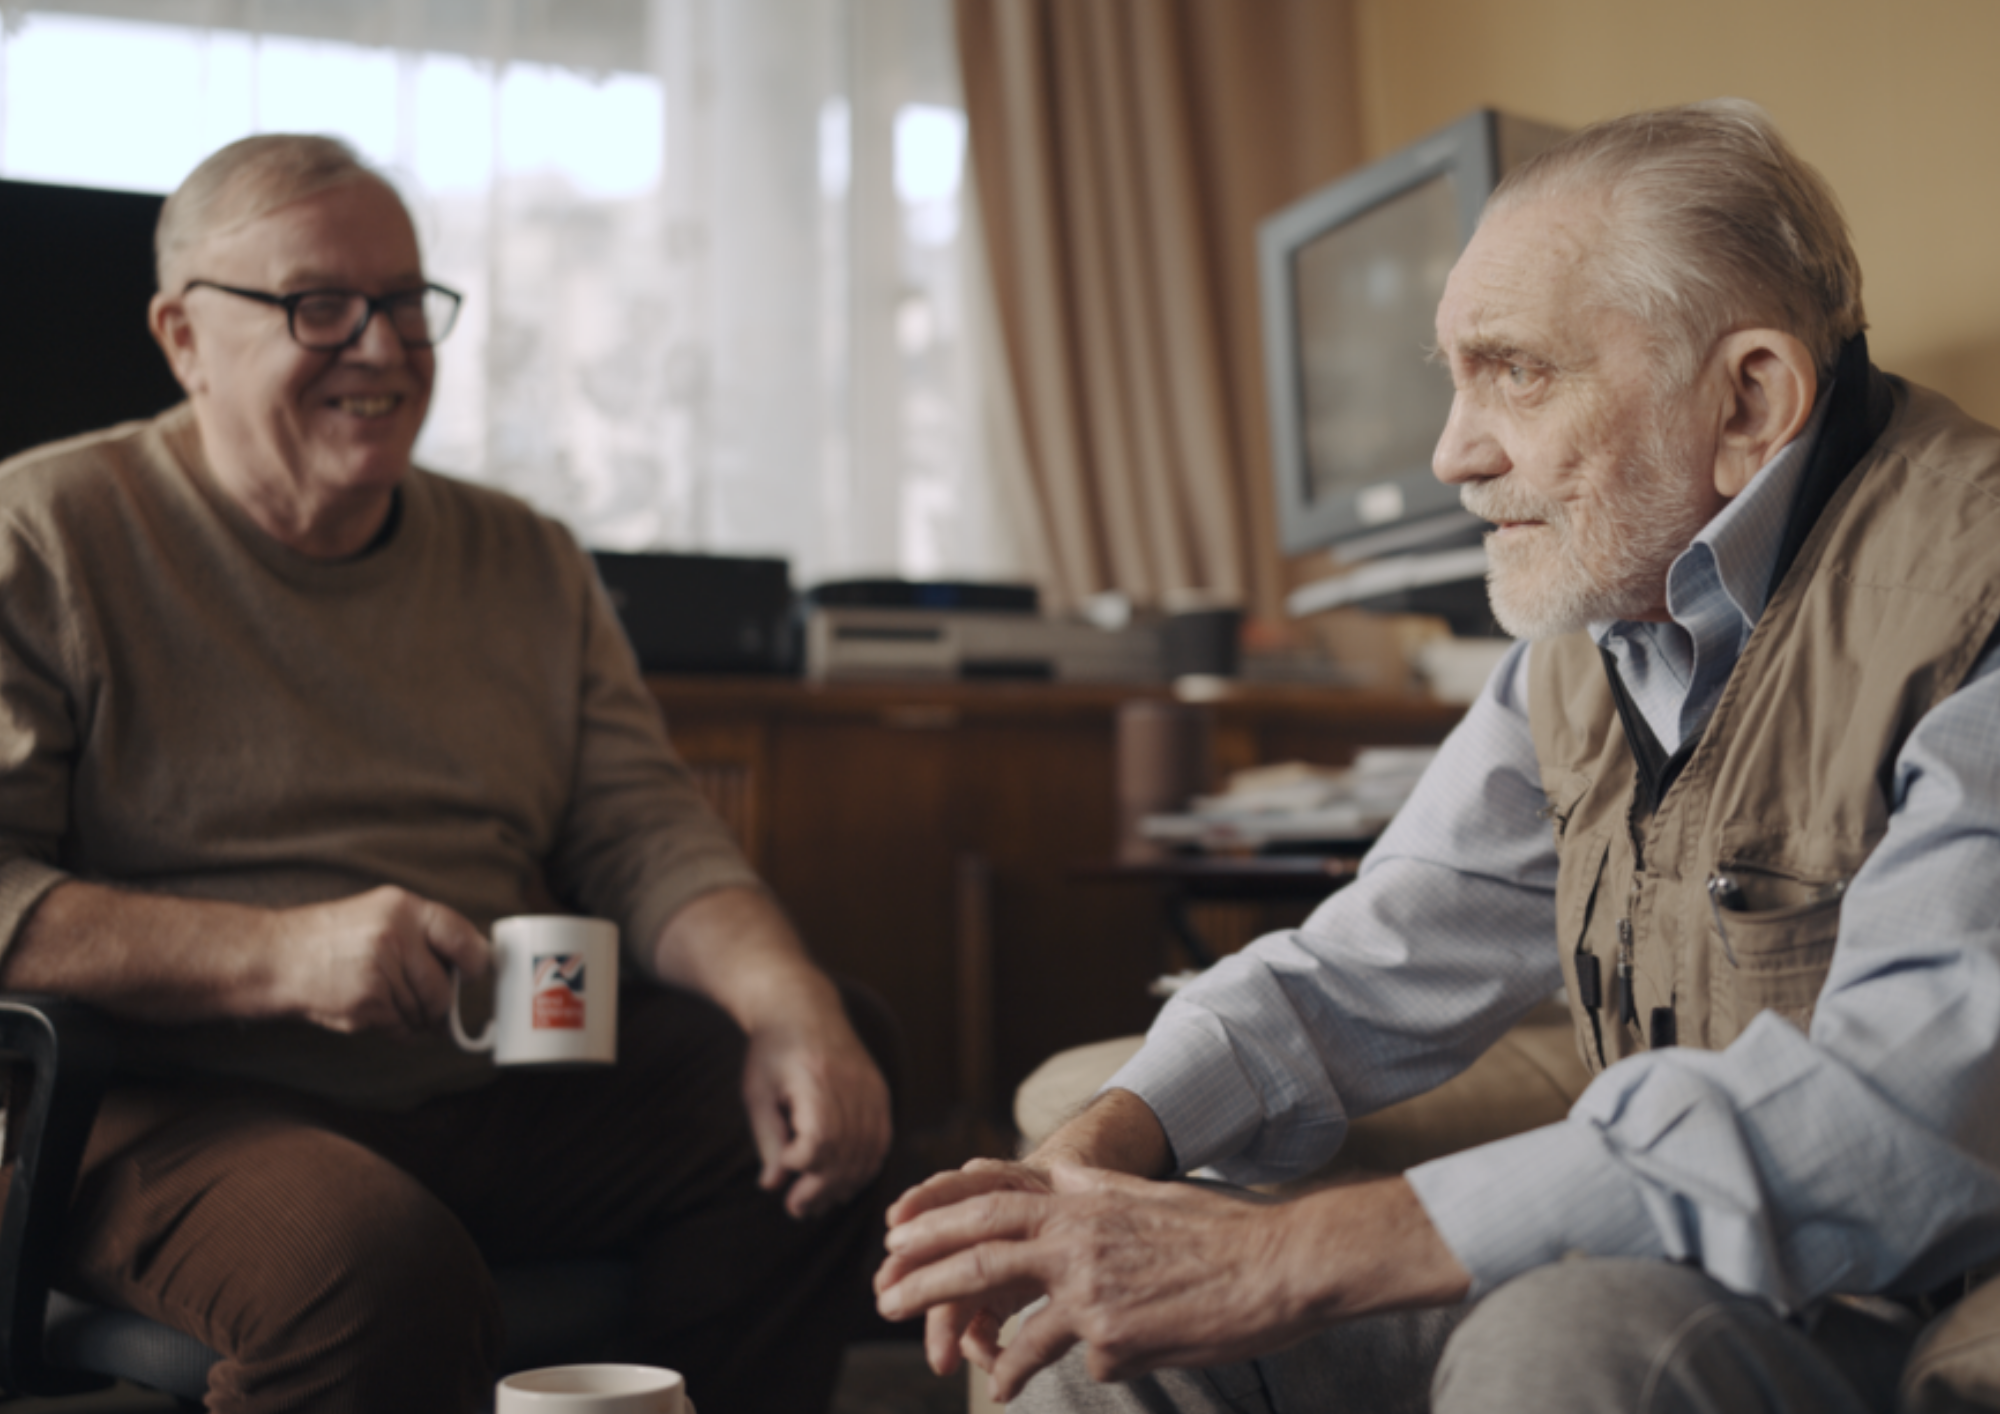 Image shows Ken talking to his support volunteer, Liam, in his living room. They smile over a cup of tea.